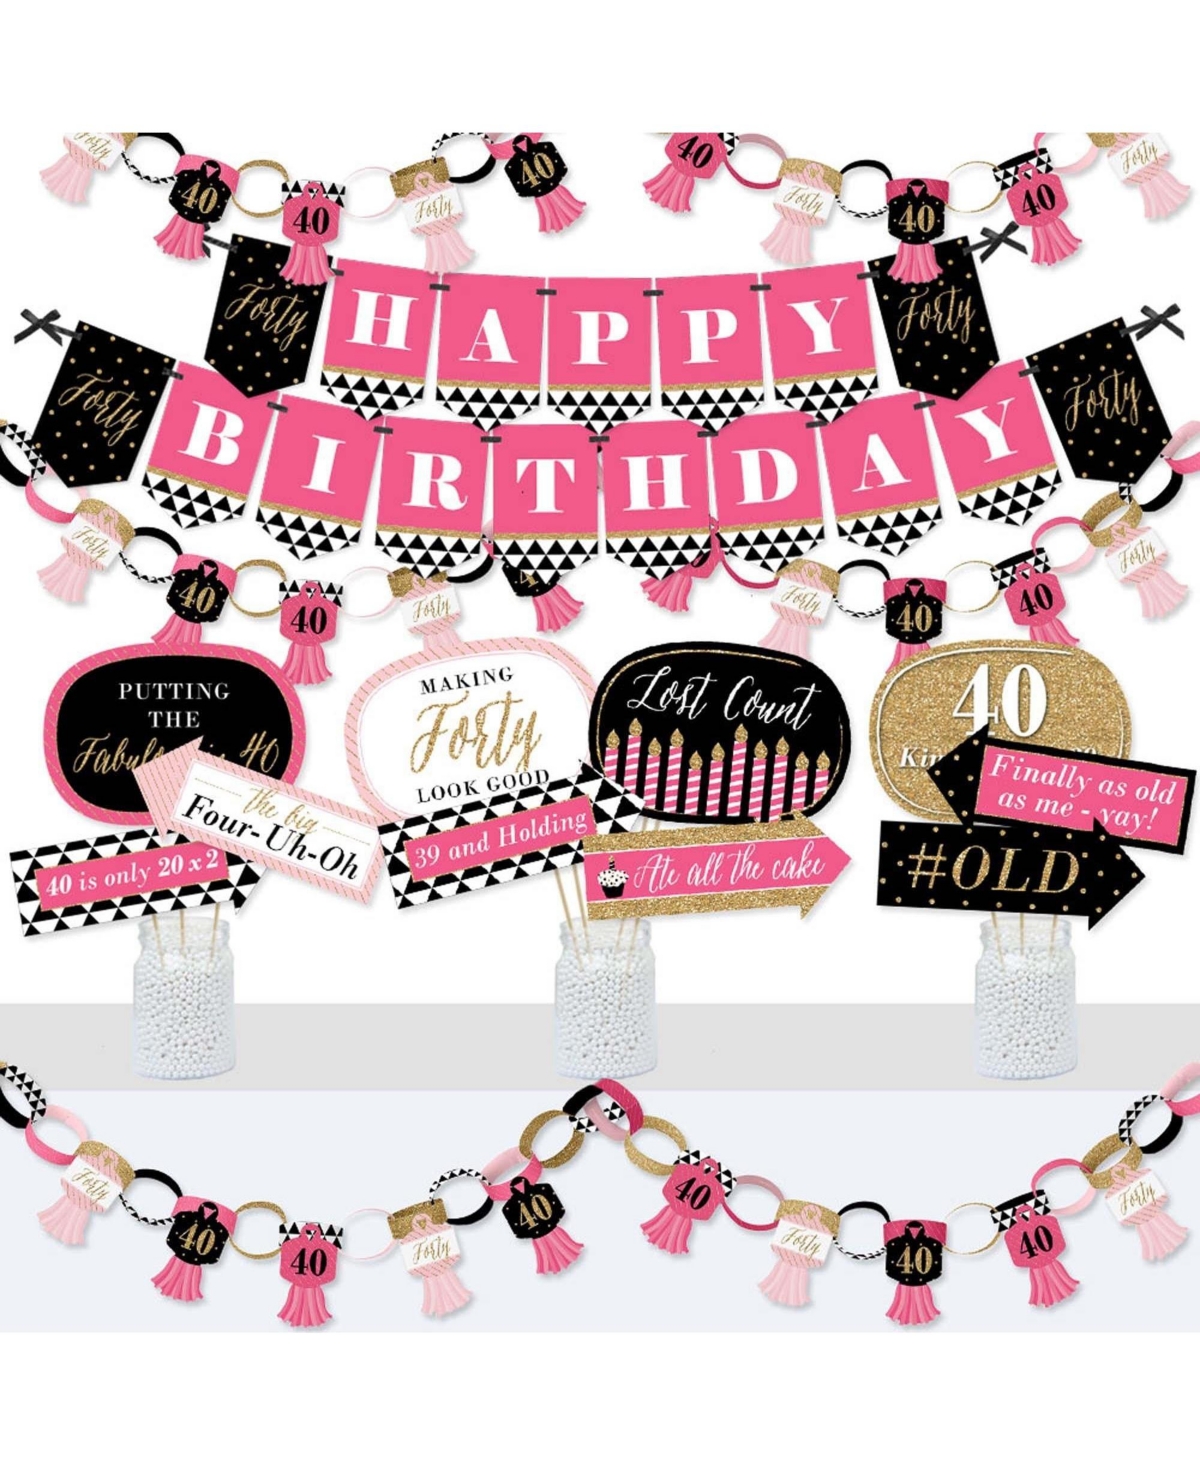 Big Dot of Happiness Chic 40th Birthday - Pink, Black and Gold - Banner and Photo Booth Decorations - Birthday Party Supplies Kit - Doterrific Bundle